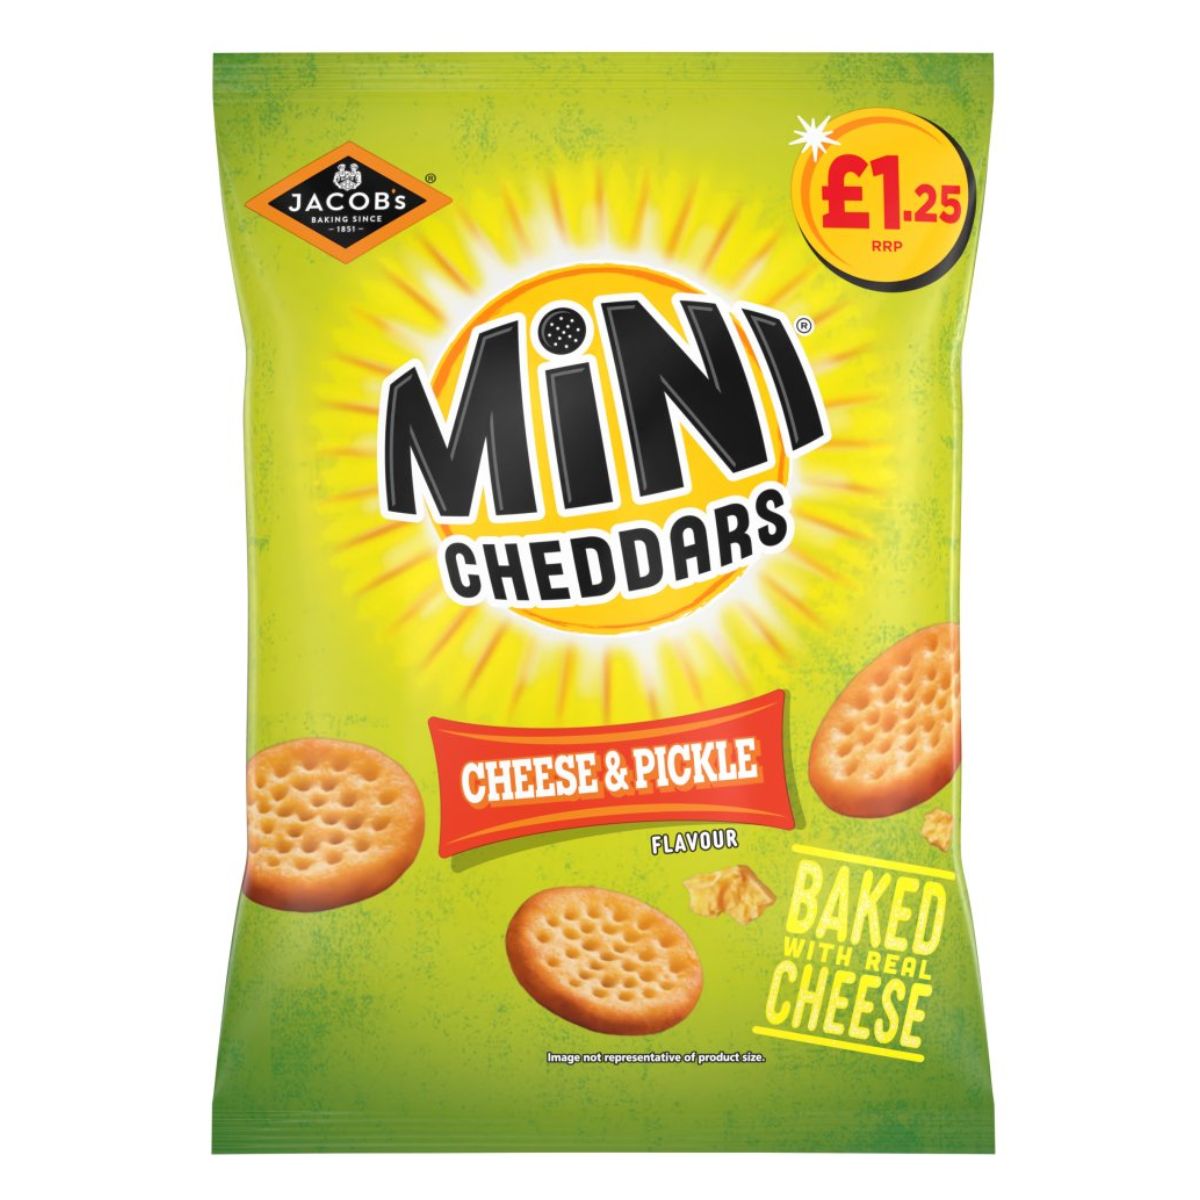 Packaging of Jacobs - Mini Cheddars Cheese & Pickle Snacks - 90g, featuring the product image against a bright yellow background.